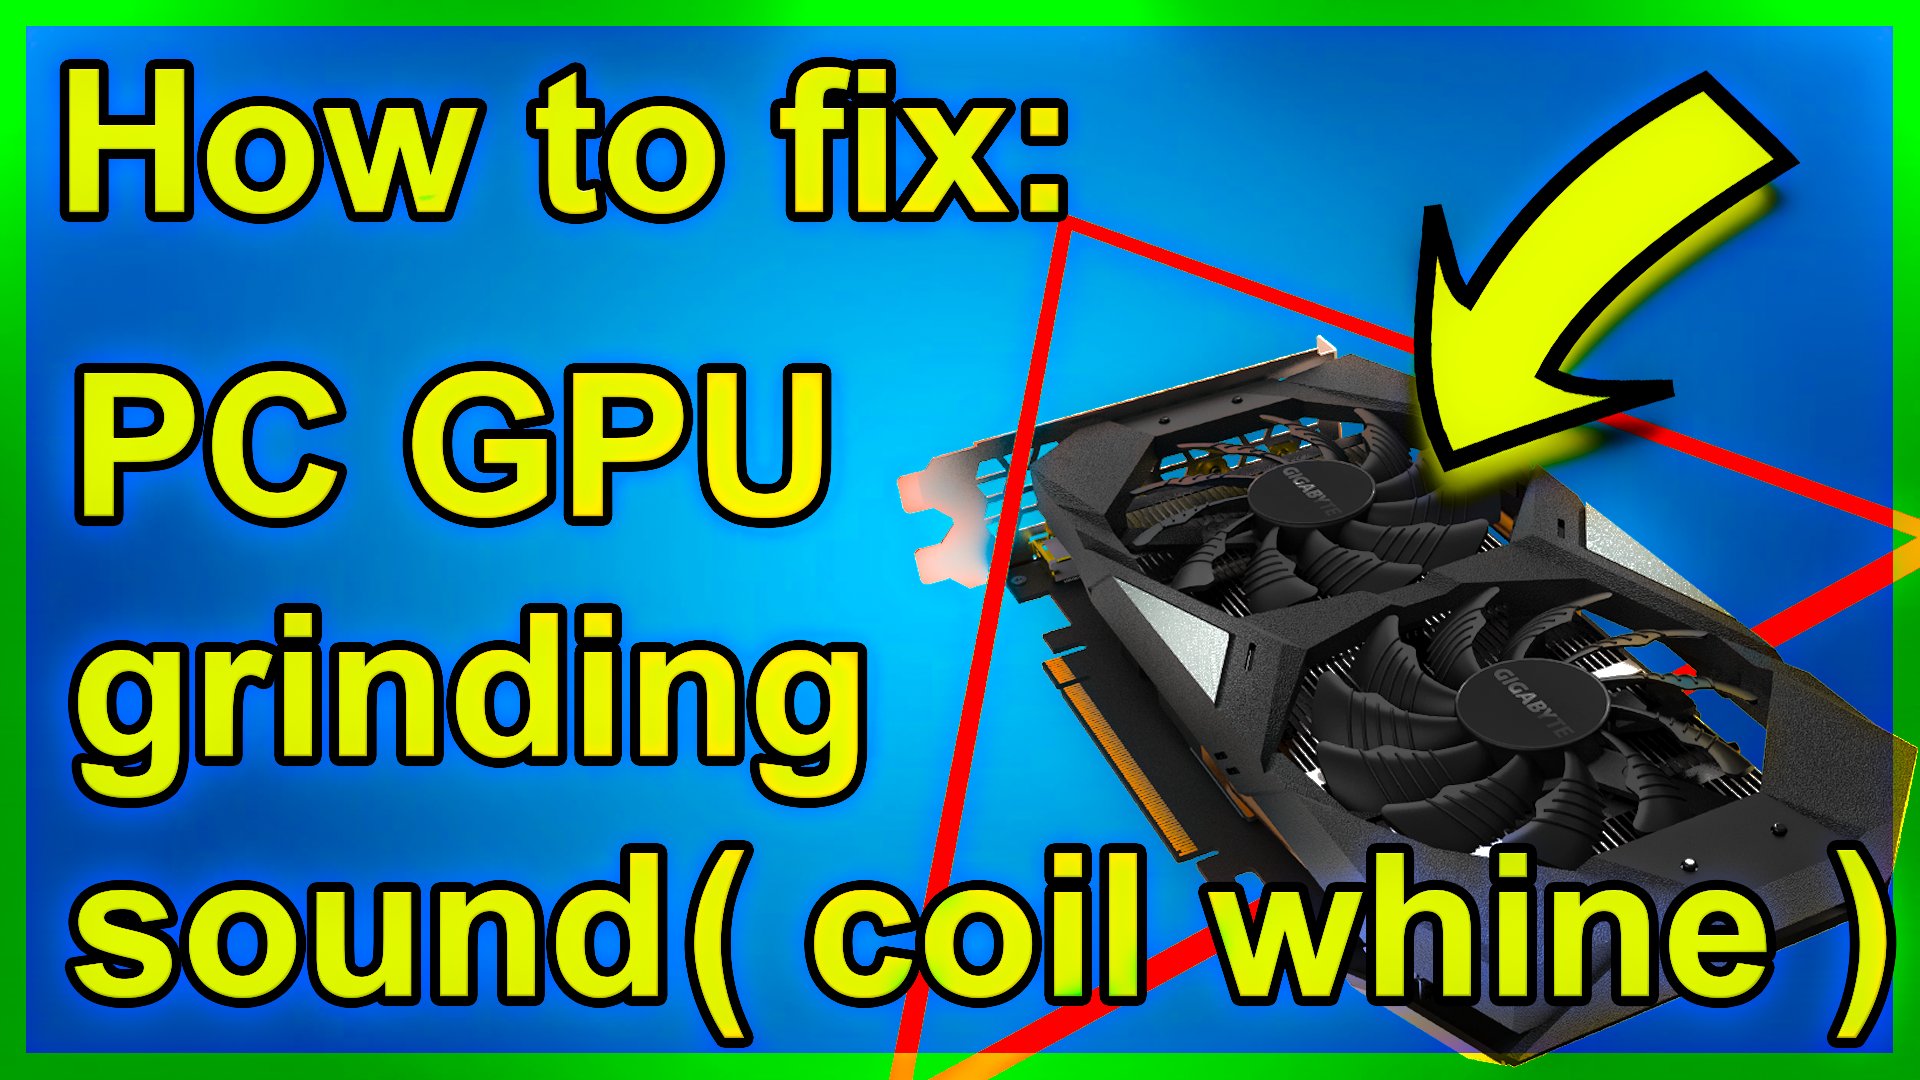 Multiplikation Begivenhed Måling Alonzo on Twitter: "DIY: How to fix GPU grinding noise (coil whine) problem  caused by GPU sagging ( NVidia GTX 1660ti ) https://t.co/gcRRFGlDQW  https://t.co/gDGXiXR8u8" / Twitter